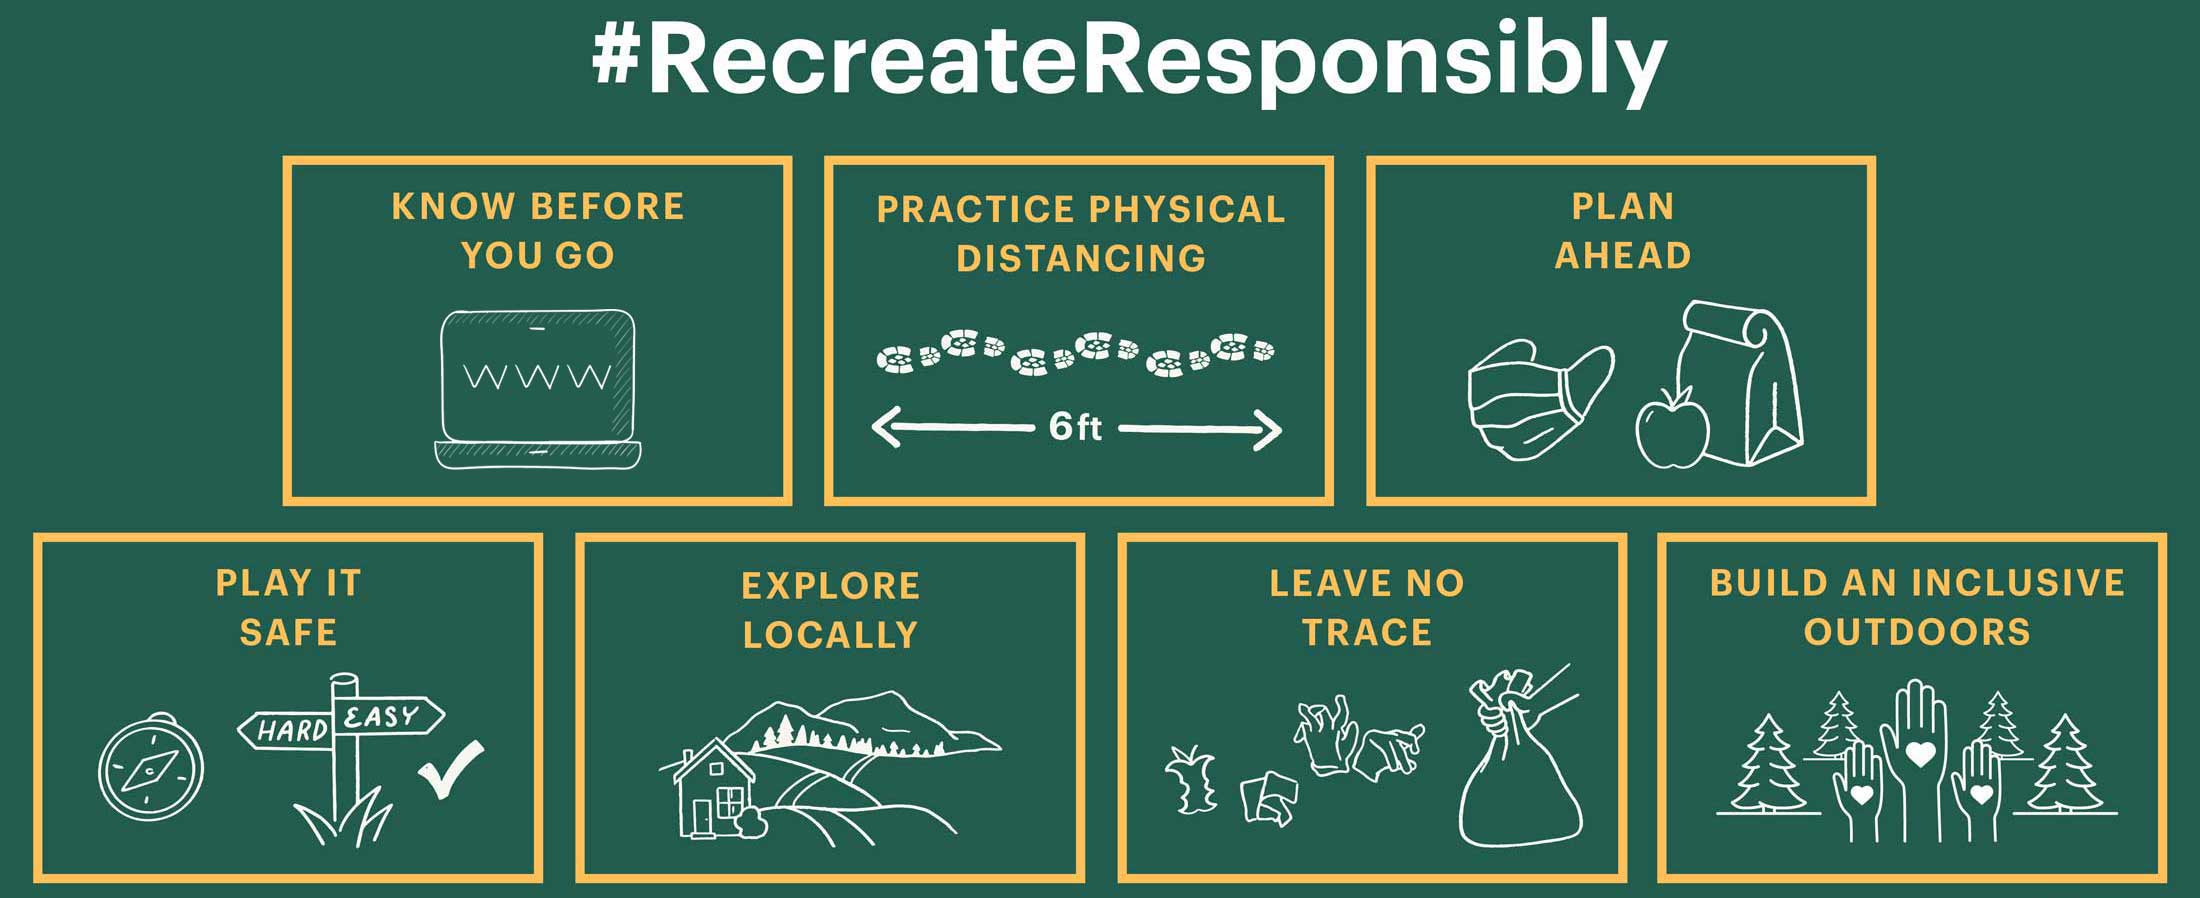 Recreate Responsibly infographic: Know Before You Go - Practice Physical Distancing